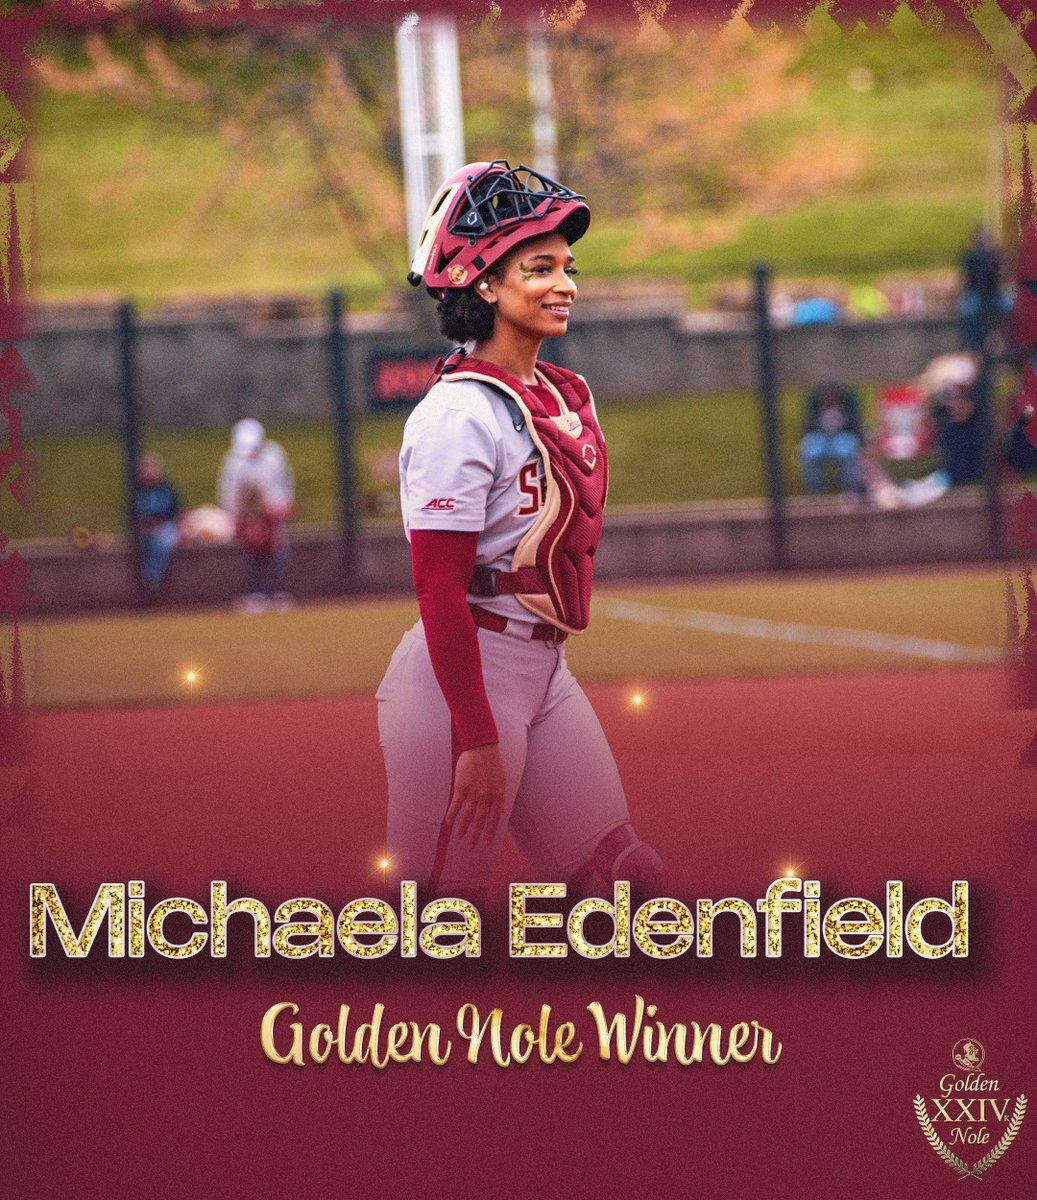 Congrats to both Amaya and Michaela who were named Golden Nole winners tonight🏆 #ALL4ONE